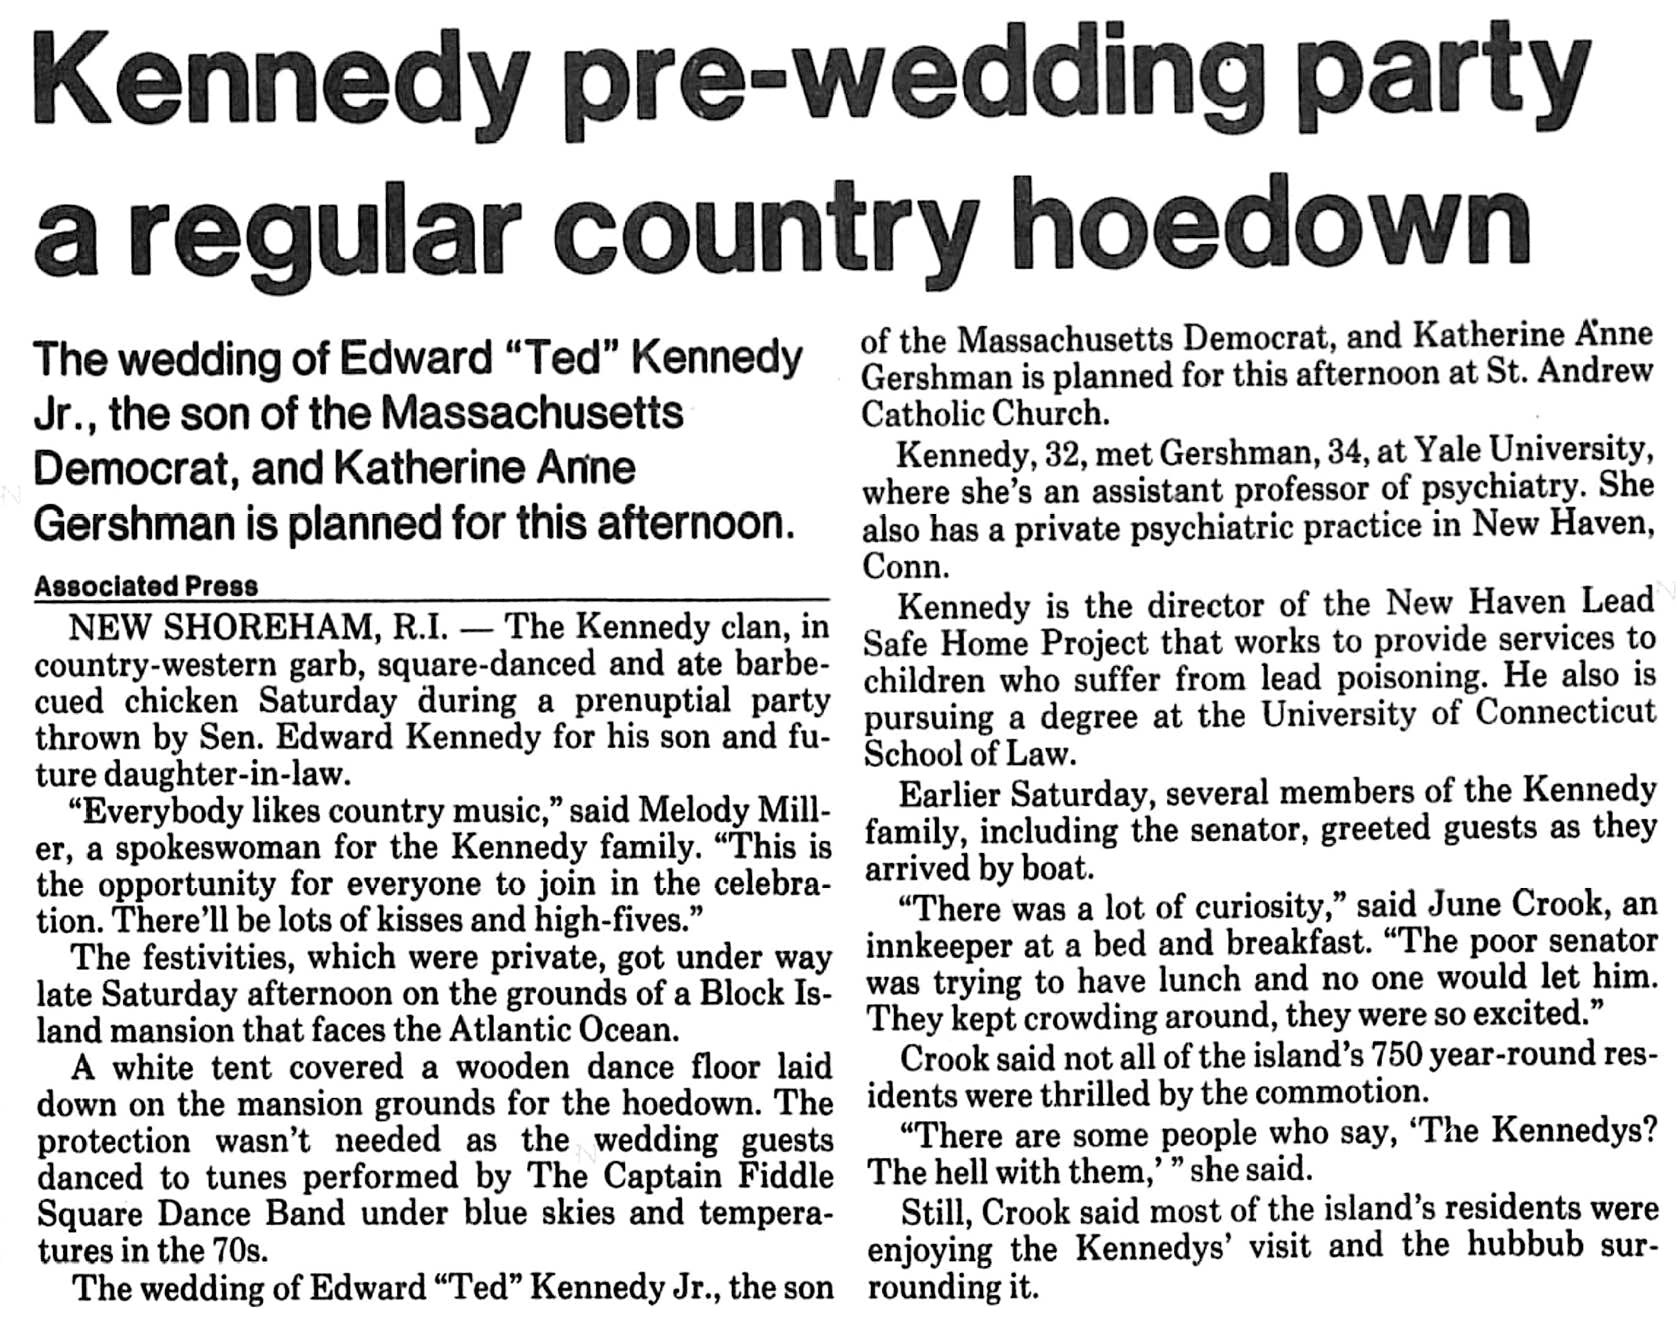 Newspaper article describing the square dance put on for the Kennedy family by the Captain Fiddle Band